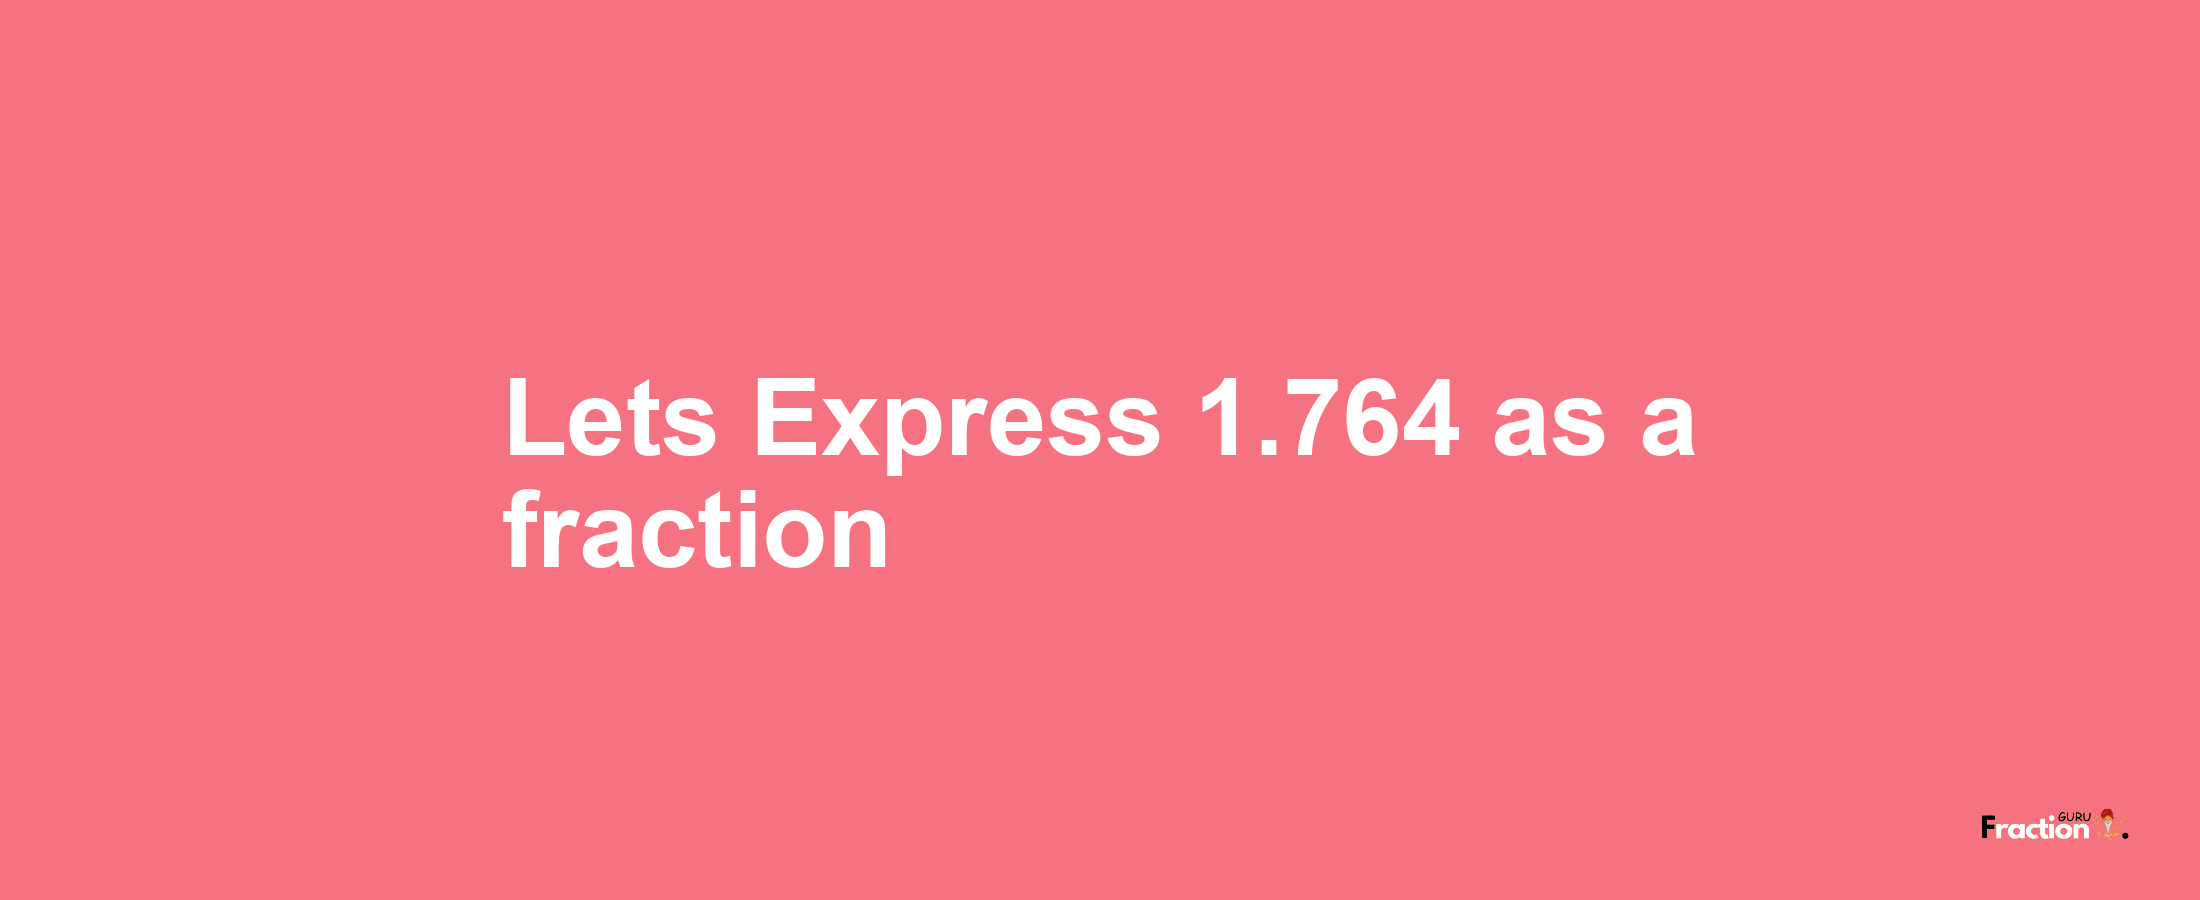 Lets Express 1.764 as afraction